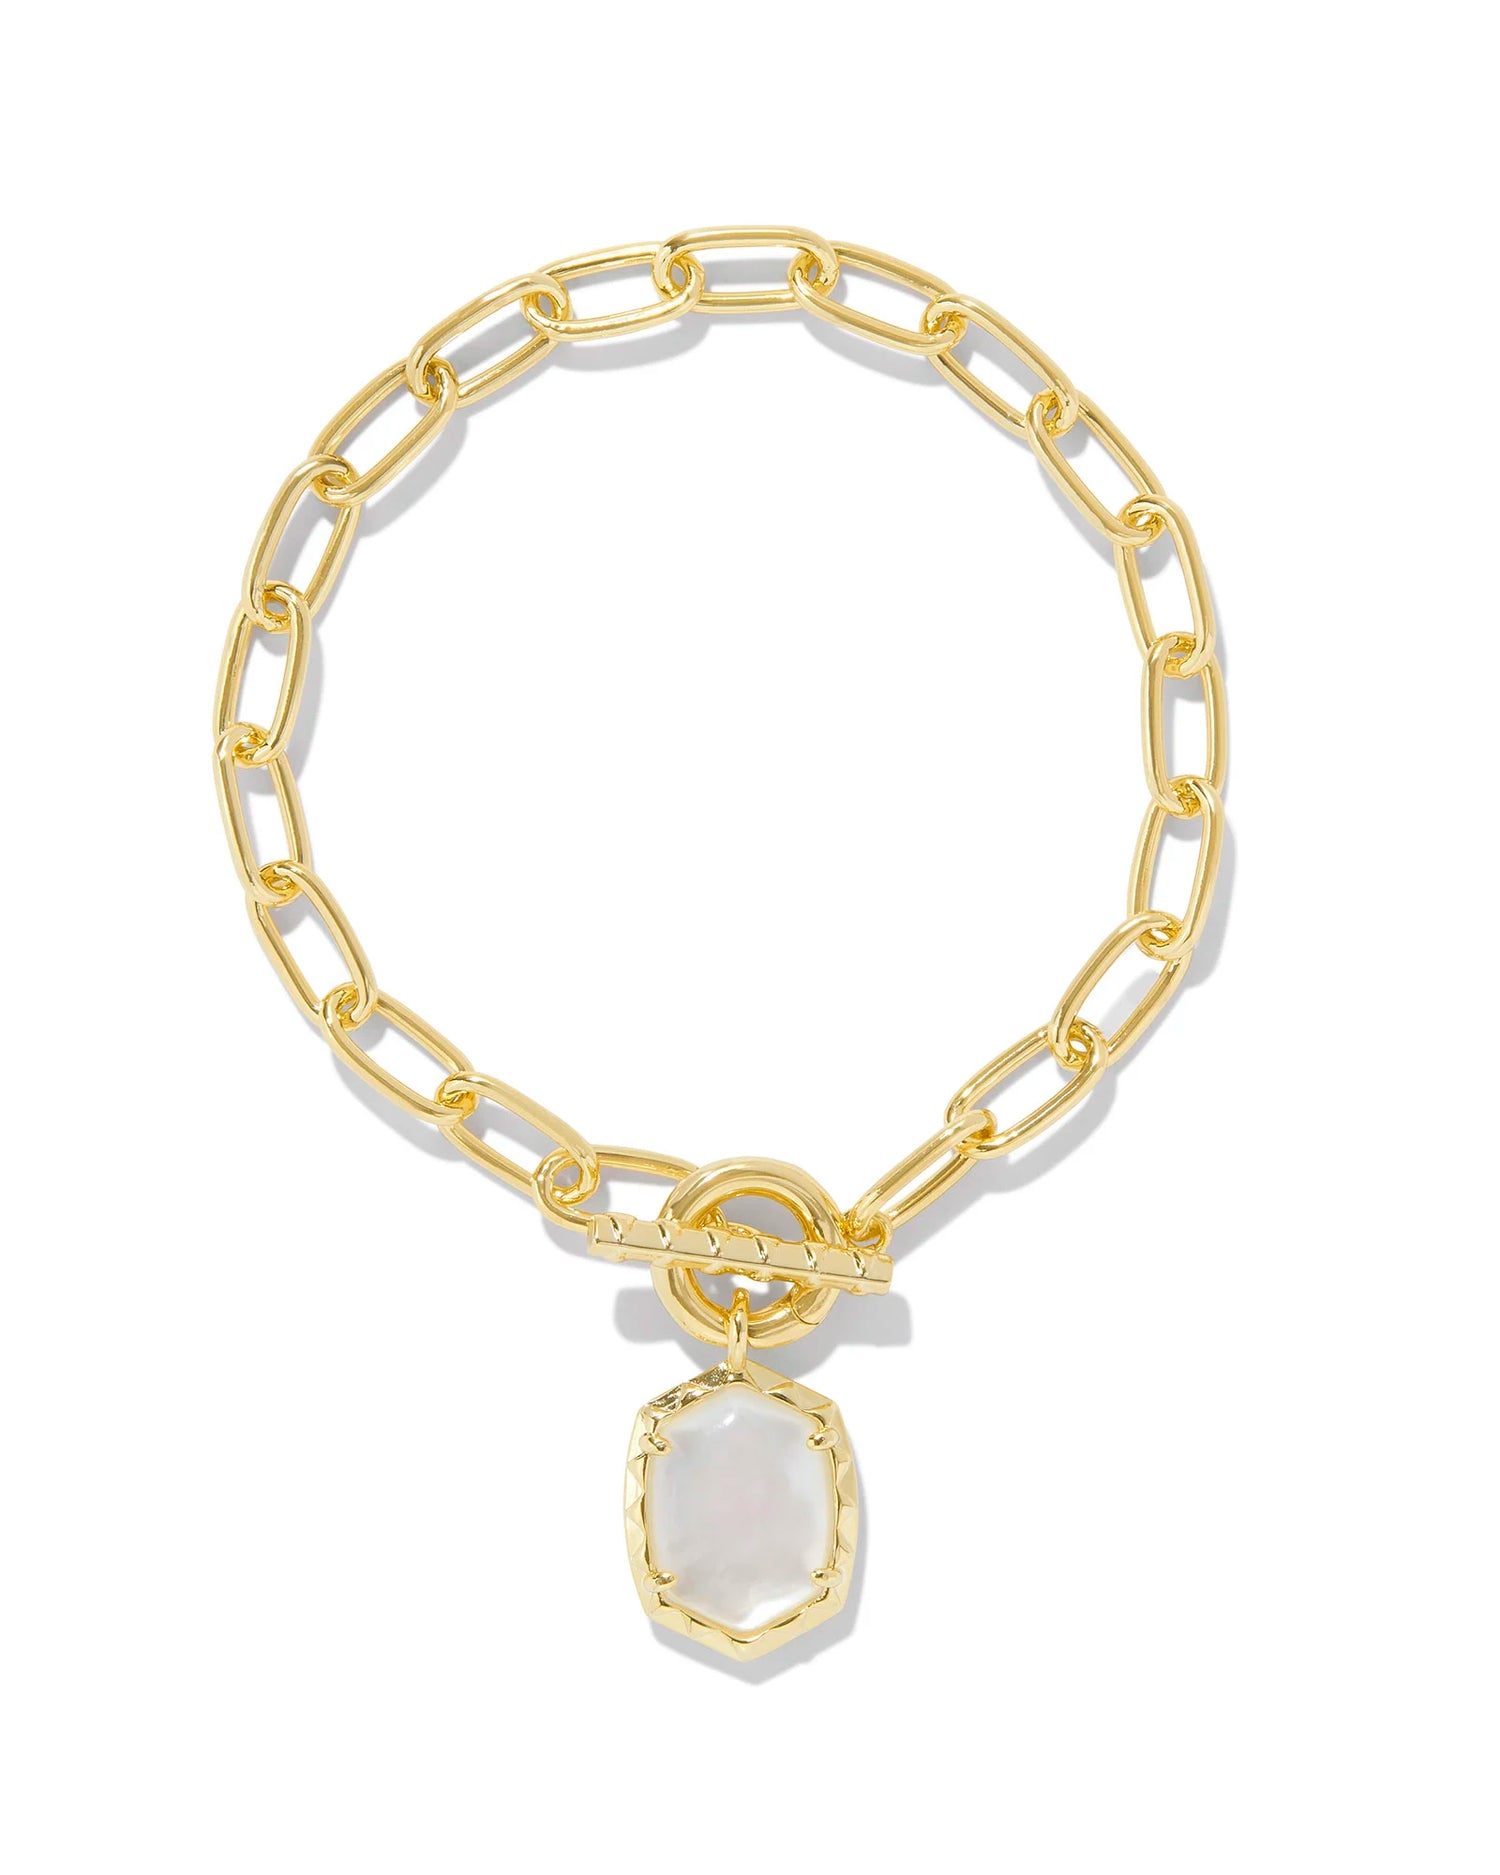 gold chain link bracelet with white mother of pearl stone